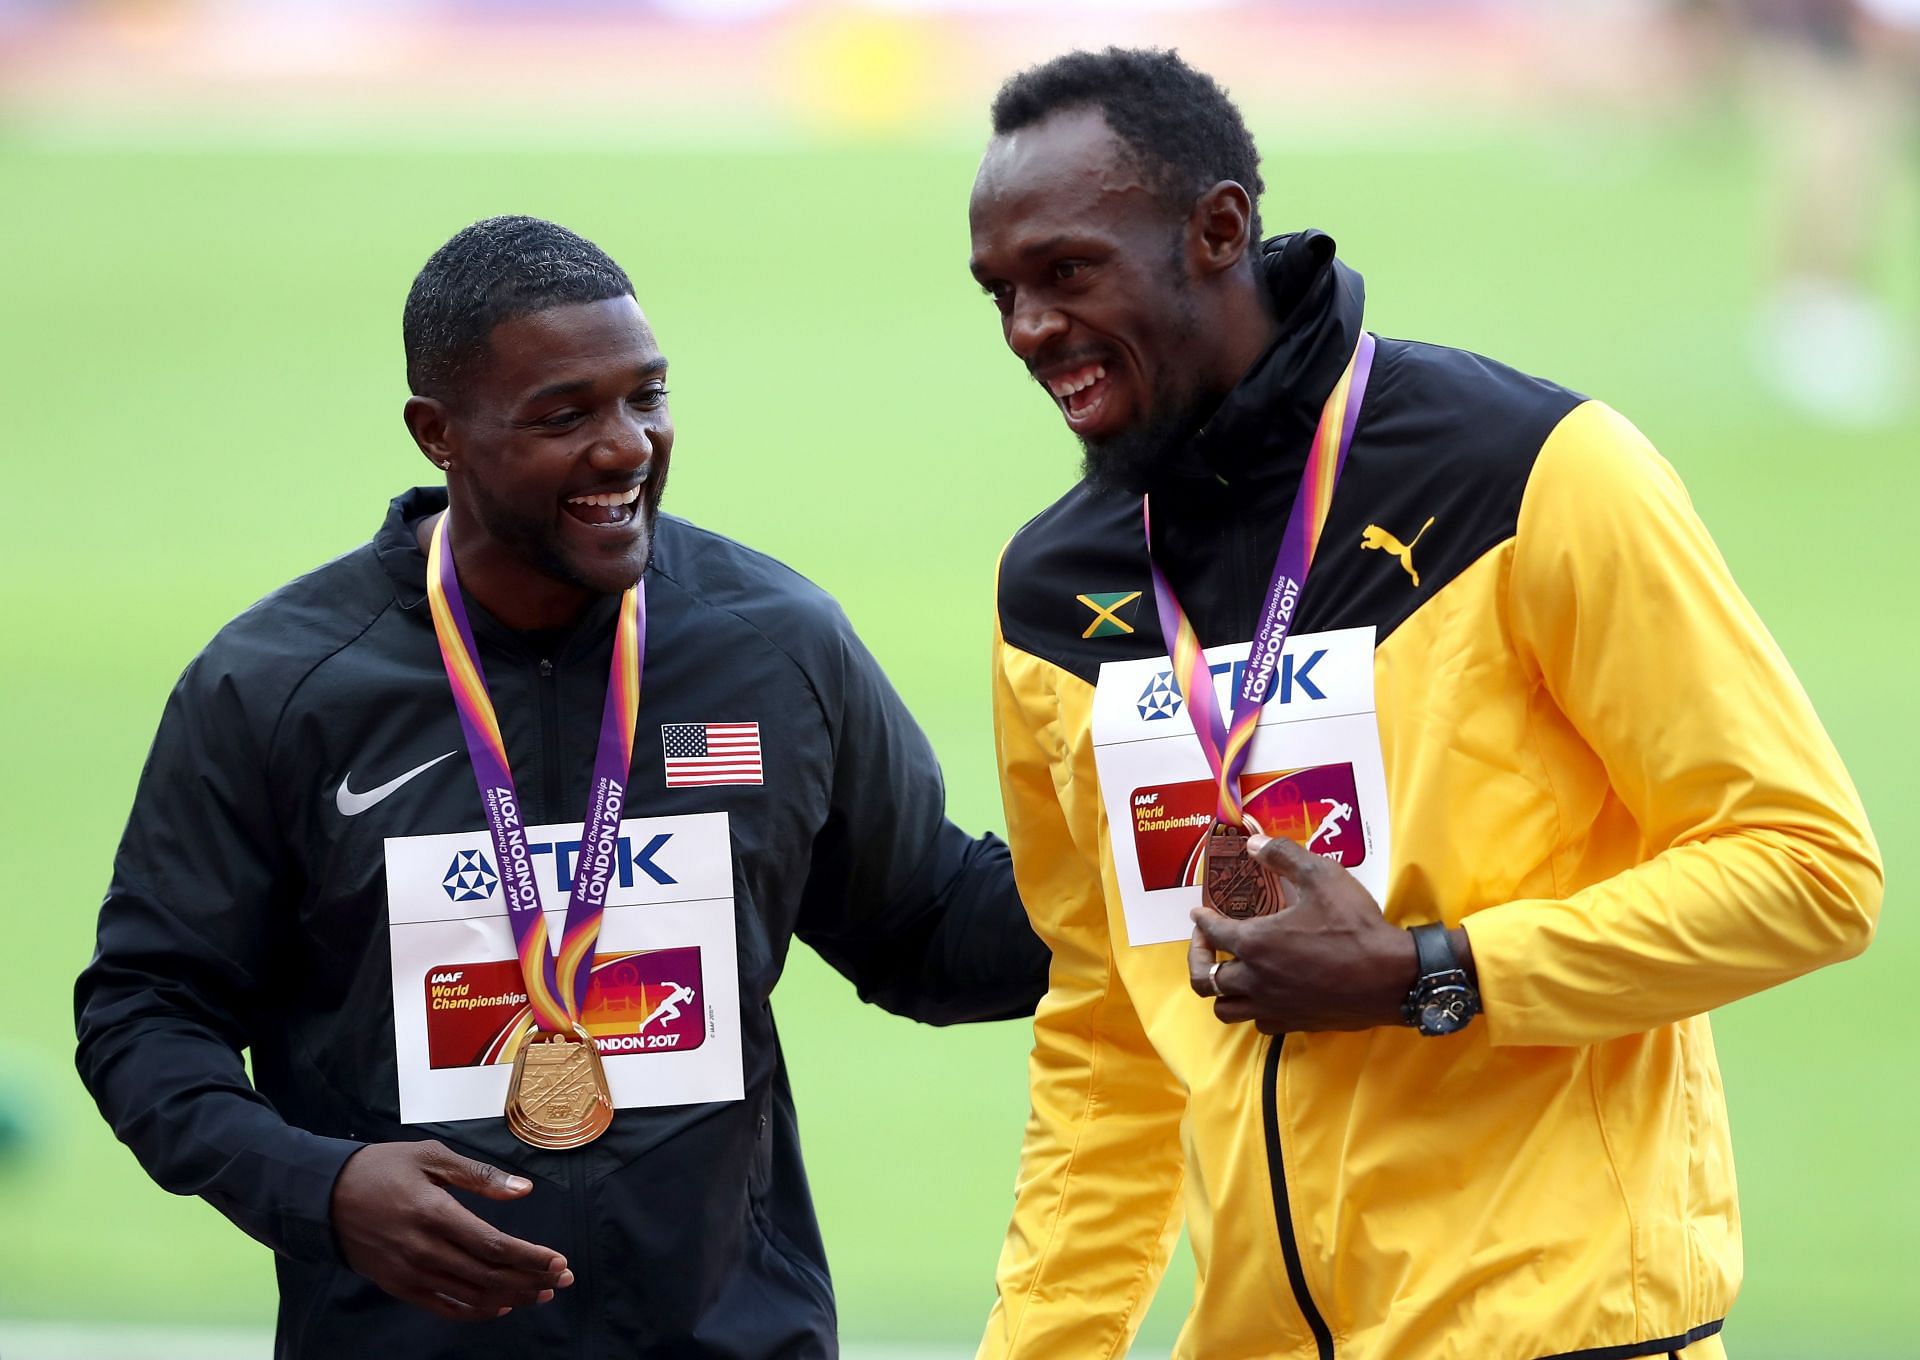 Justin Gatlin (left) with Usain Bolt at the 2017 World Championships. (PC: Getty Images)